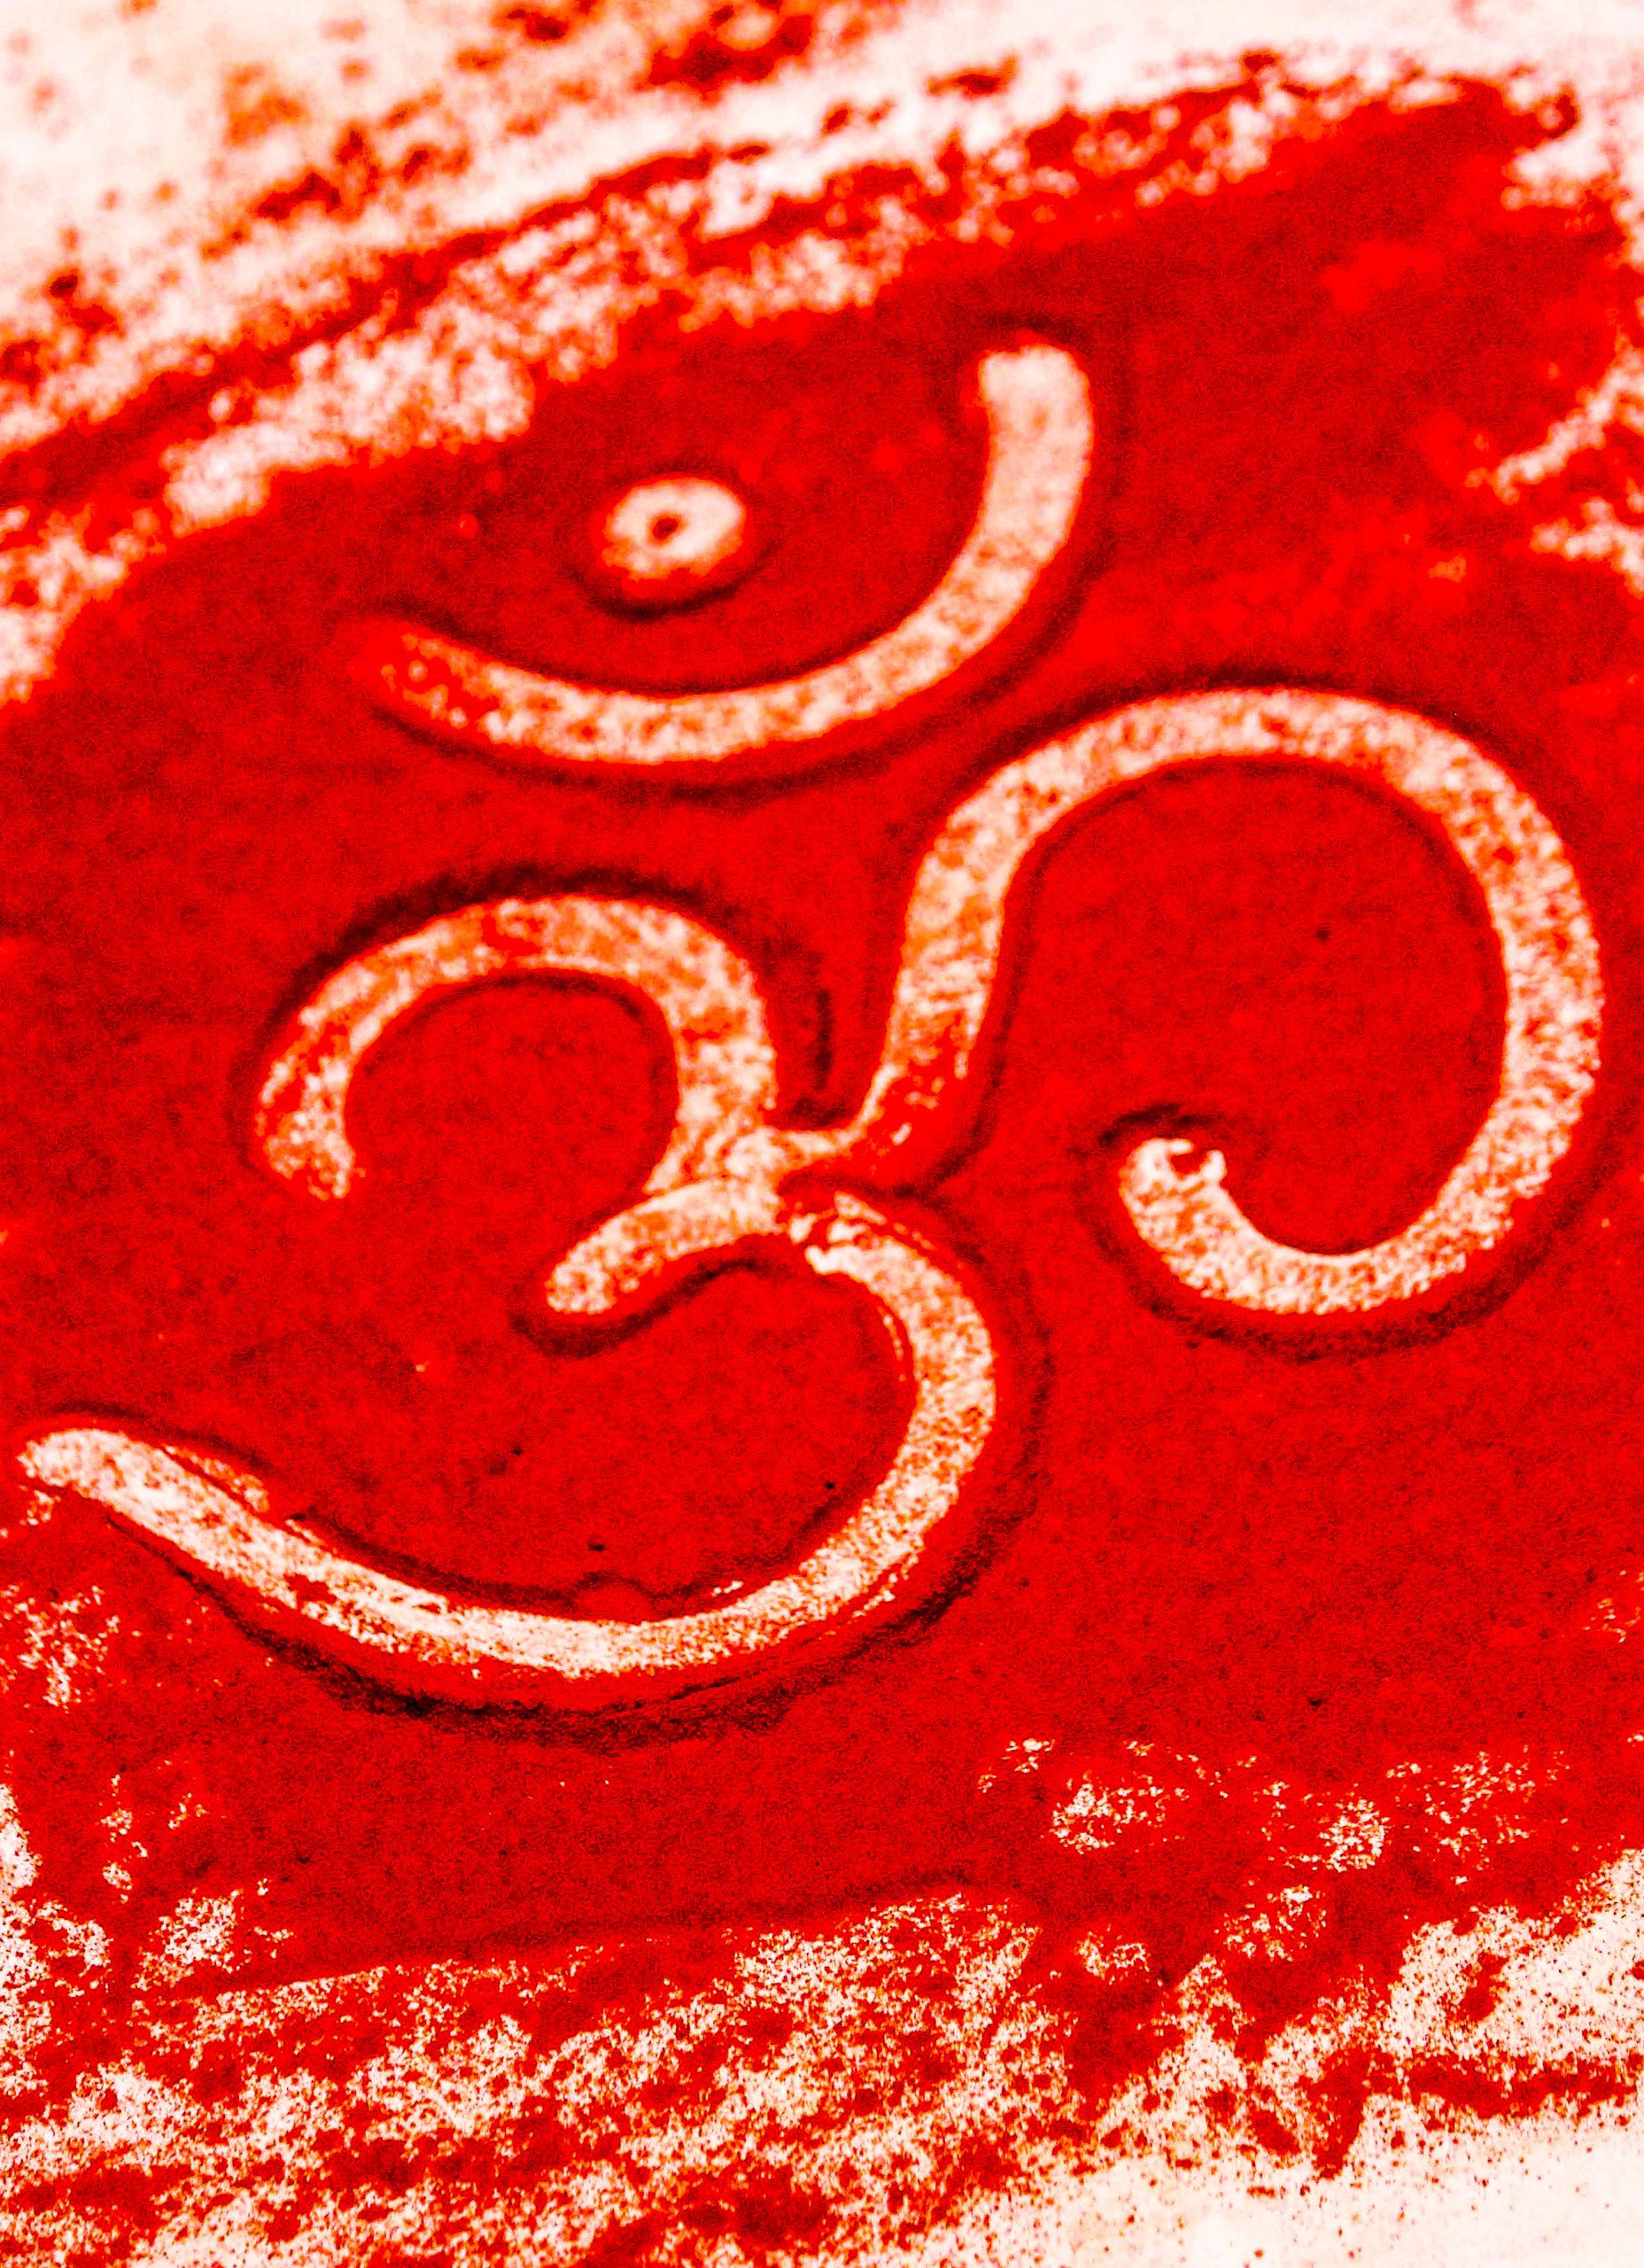 Om written on red color